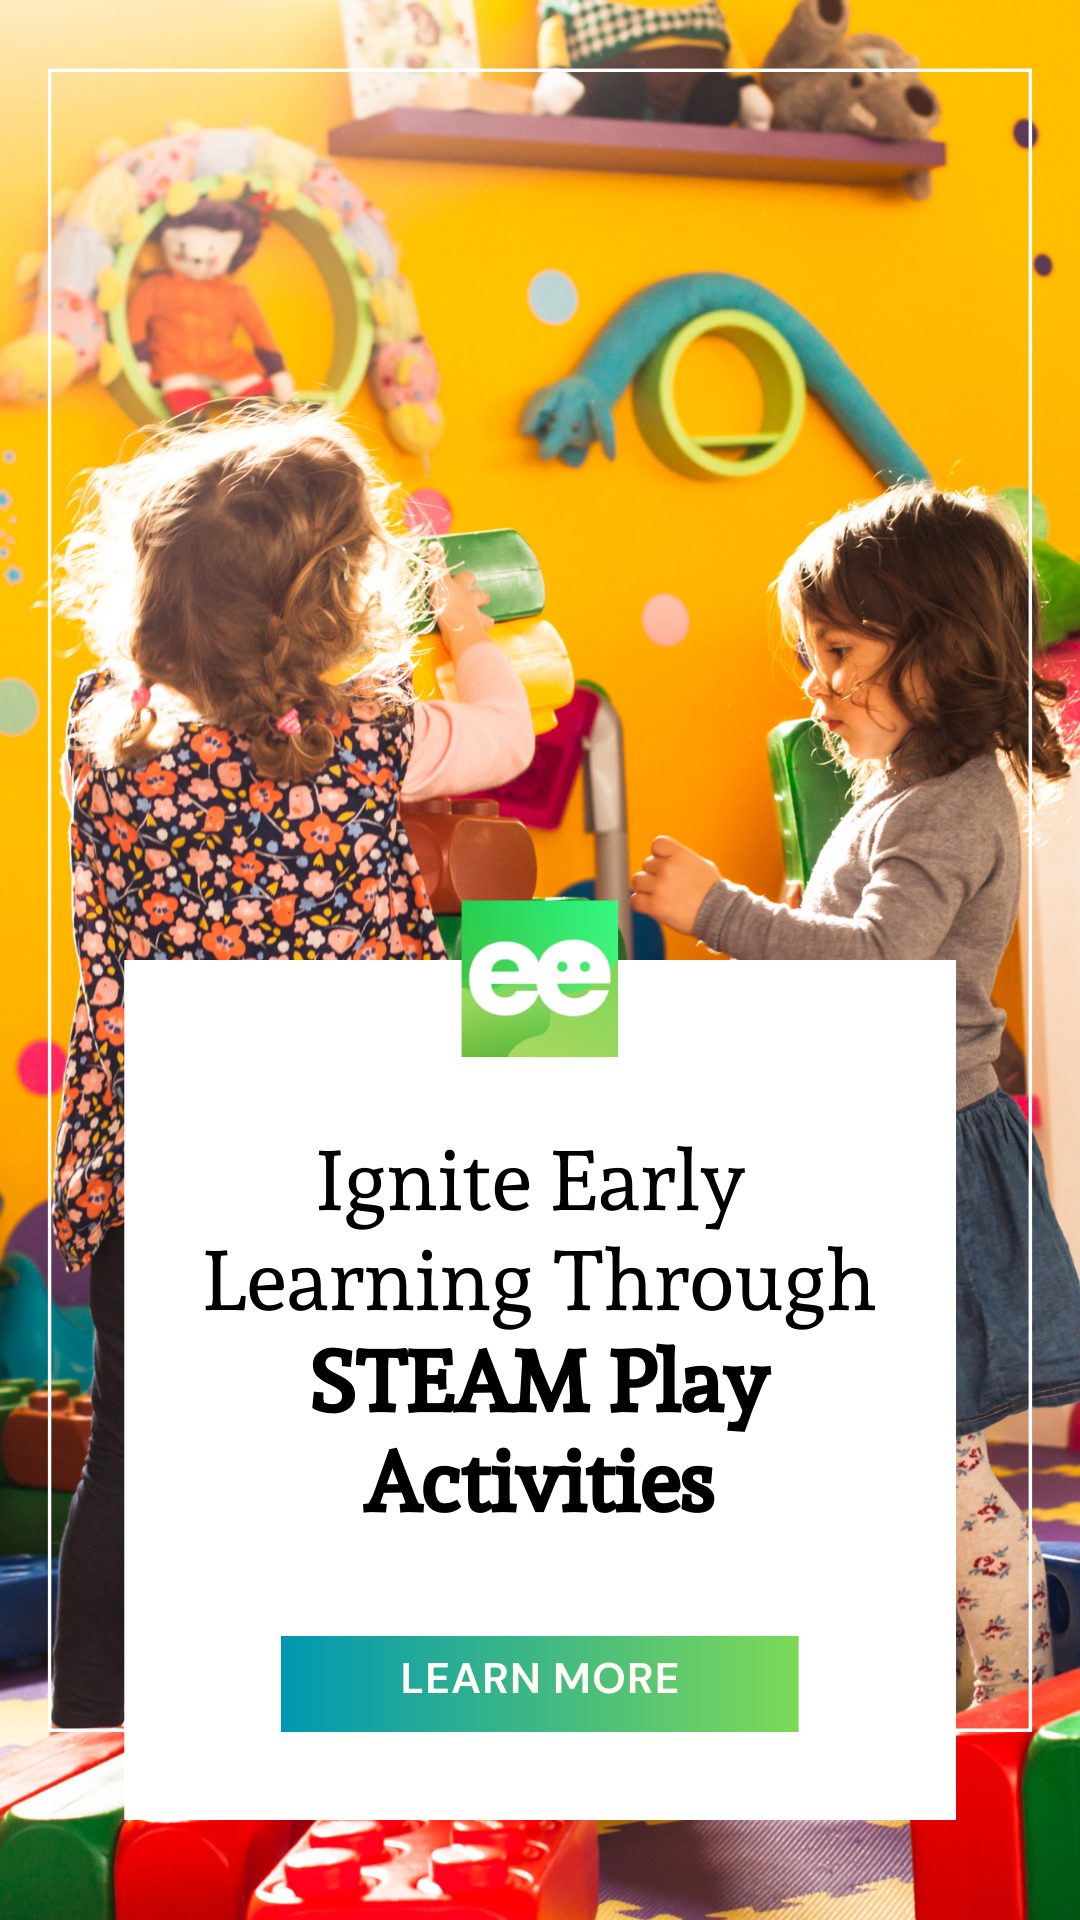 environment set up with play-based STEM activities suitable for toddlers